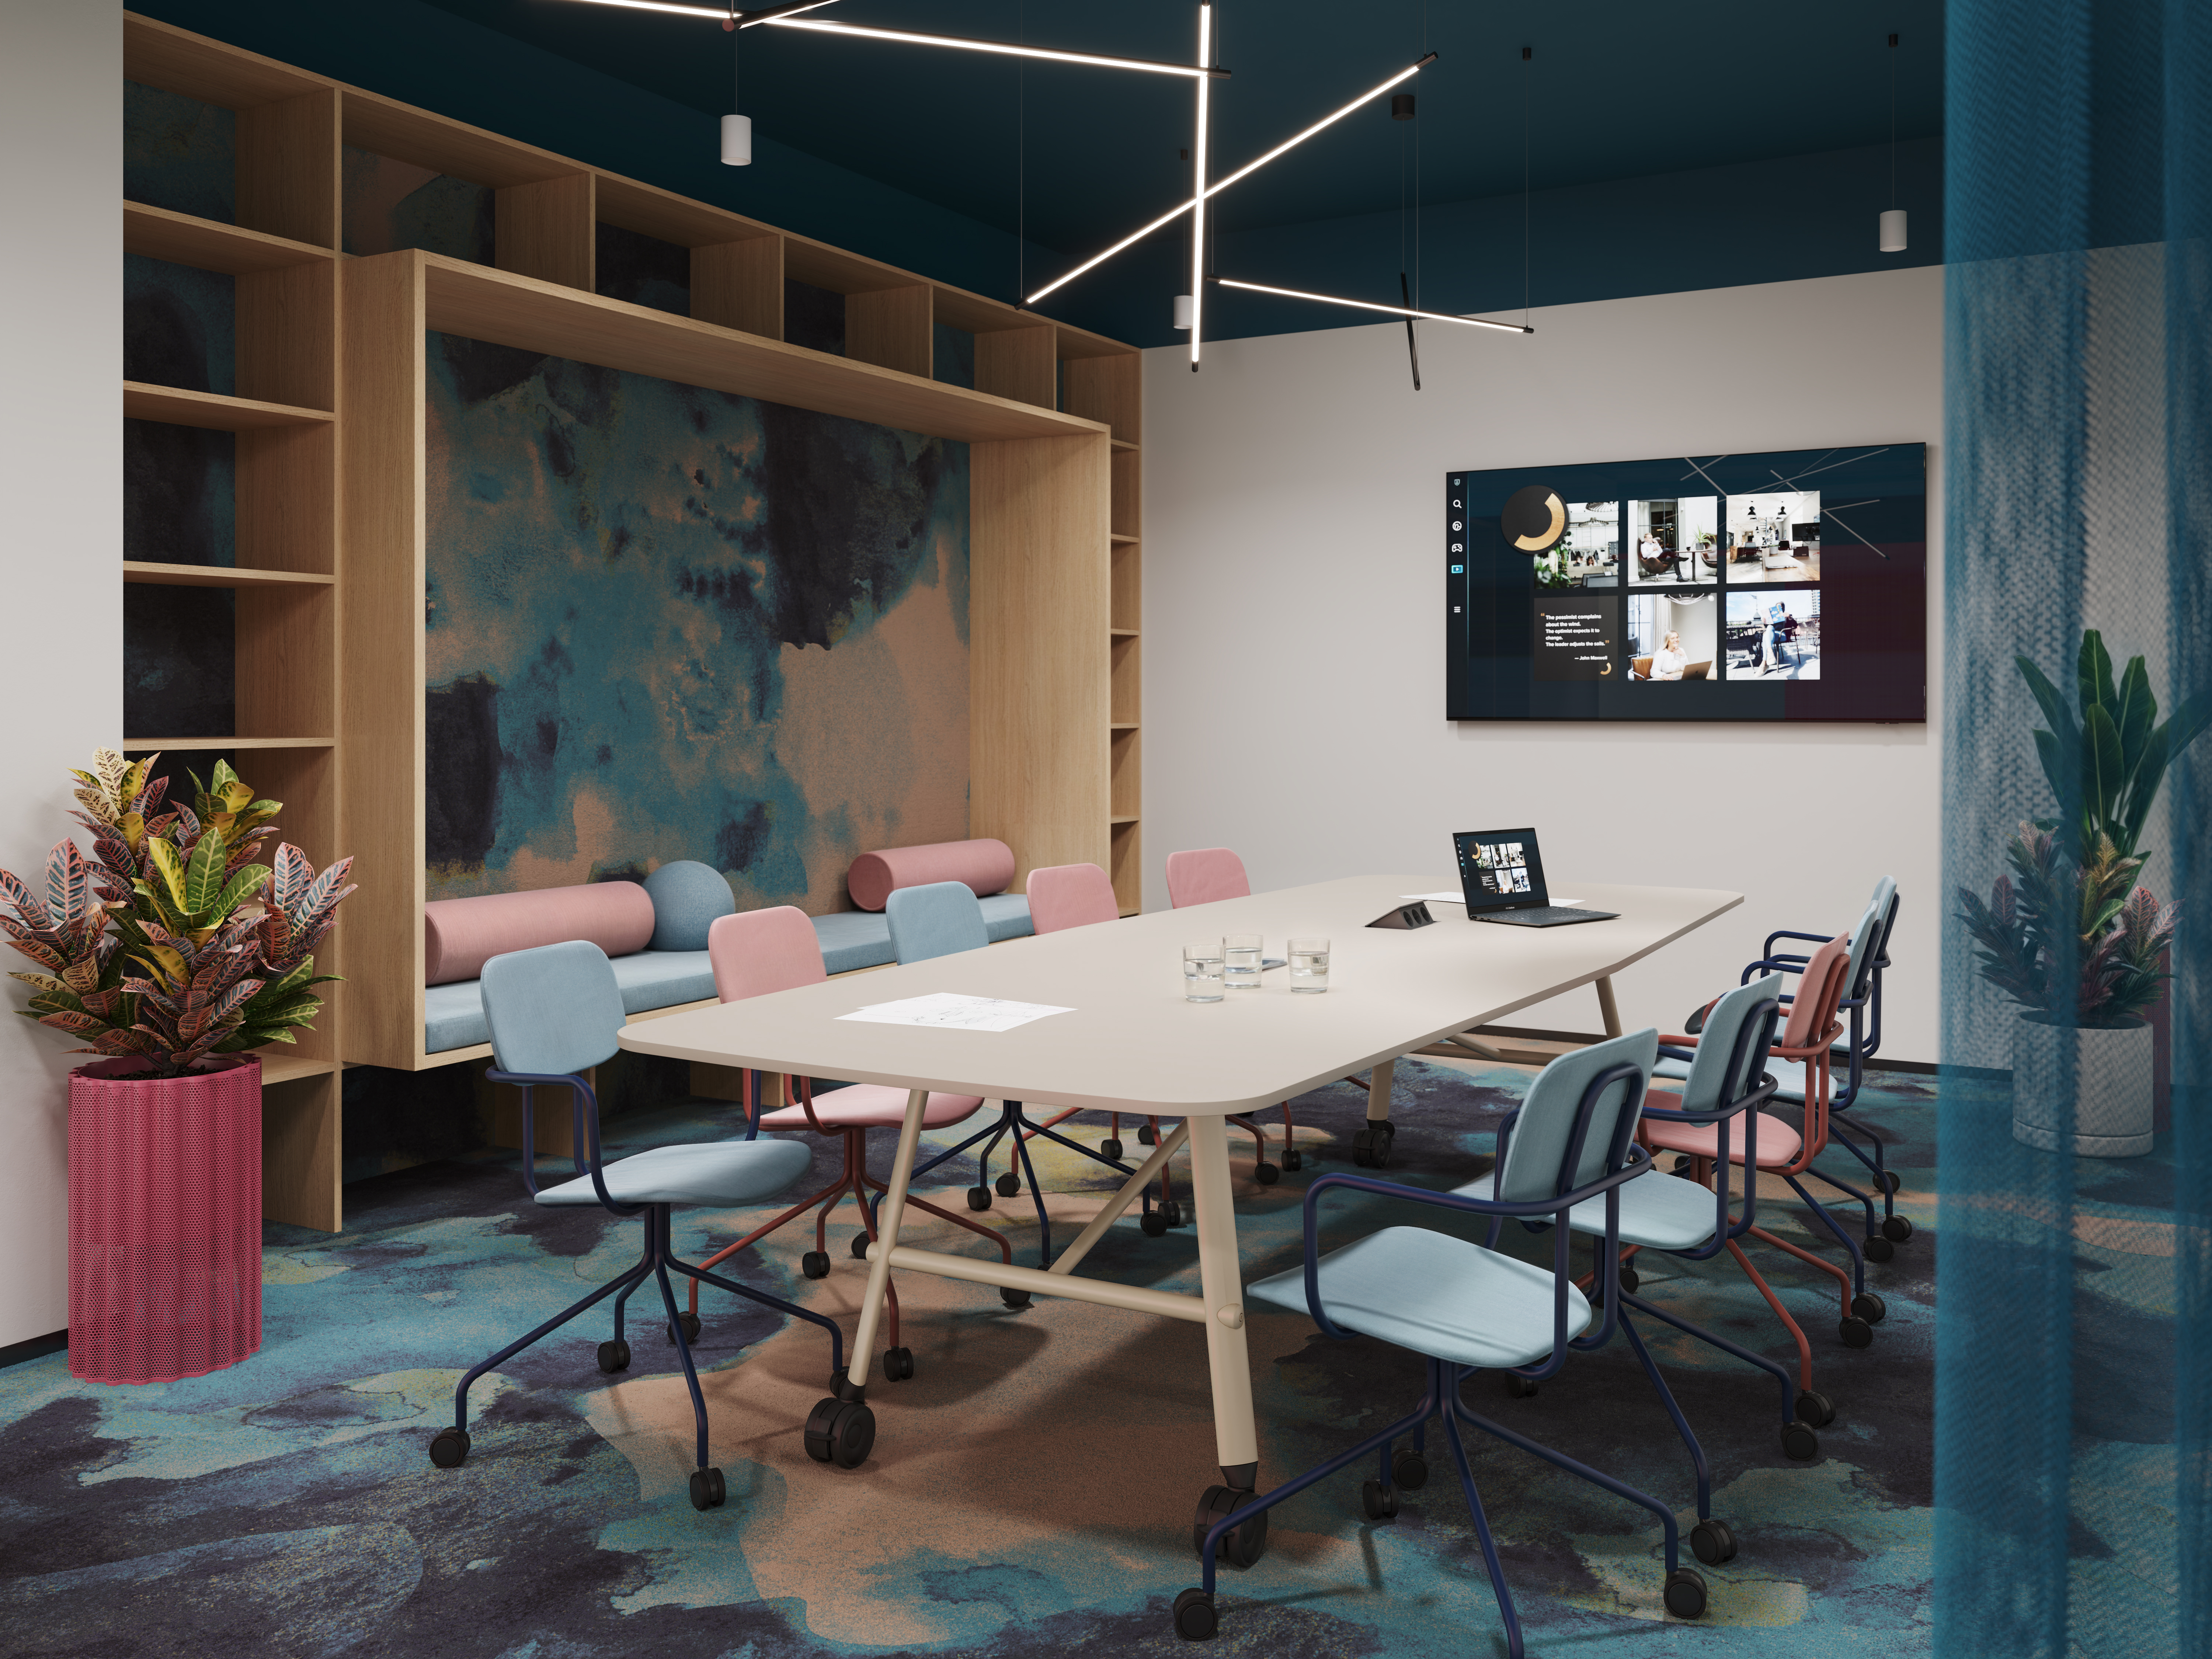 A meeting room at Workland Vektor – 3D visual.